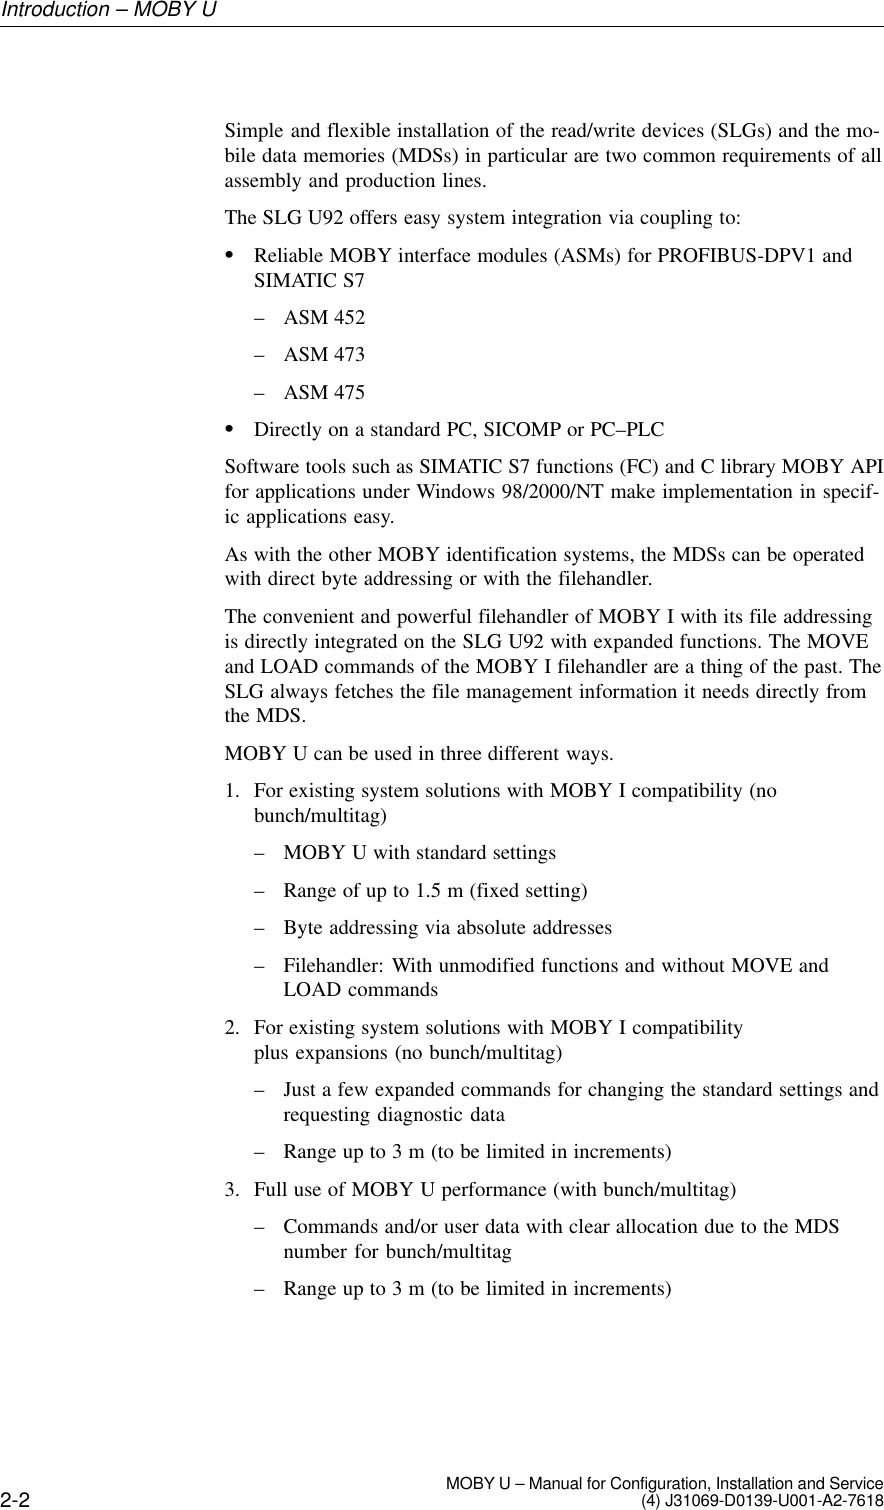 2-2 MOBY U – Manual for Configuration, Installation and Service(4) J31069-D0139-U001-A2-7618Simple and flexible installation of the read/write devices (SLGs) and the mo-bile data memories (MDSs) in particular are two common requirements of allassembly and production lines.The SLG U92 offers easy system integration via coupling to:SReliable MOBY interface modules (ASMs) for PROFIBUS-DPV1 andSIMATIC S7– ASM 452– ASM 473– ASM 475SDirectly on a standard PC, SICOMP or PC–PLCSoftware tools such as SIMATIC S7 functions (FC) and C library MOBY APIfor applications under Windows 98/2000/NT make implementation in specif-ic applications easy.As with the other MOBY identification systems, the MDSs can be operatedwith direct byte addressing or with the filehandler.The convenient and powerful filehandler of MOBY I with its file addressingis directly integrated on the SLG U92 with expanded functions. The MOVEand LOAD commands of the MOBY I filehandler are a thing of the past. TheSLG always fetches the file management information it needs directly fromthe MDS.MOBY U can be used in three different ways.1. For existing system solutions with MOBY I compatibility (nobunch/multitag)– MOBY U with standard settings– Range of up to 1.5 m (fixed setting)– Byte addressing via absolute addresses– Filehandler: With unmodified functions and without MOVE andLOAD commands2. For existing system solutions with MOBY I compatibilityplus expansions (no bunch/multitag)– Just a few expanded commands for changing the standard settings andrequesting diagnostic data– Range up to 3 m (to be limited in increments)3. Full use of MOBY U performance (with bunch/multitag)– Commands and/or user data with clear allocation due to the MDSnumber for bunch/multitag– Range up to 3 m (to be limited in increments)Introduction – MOBY U